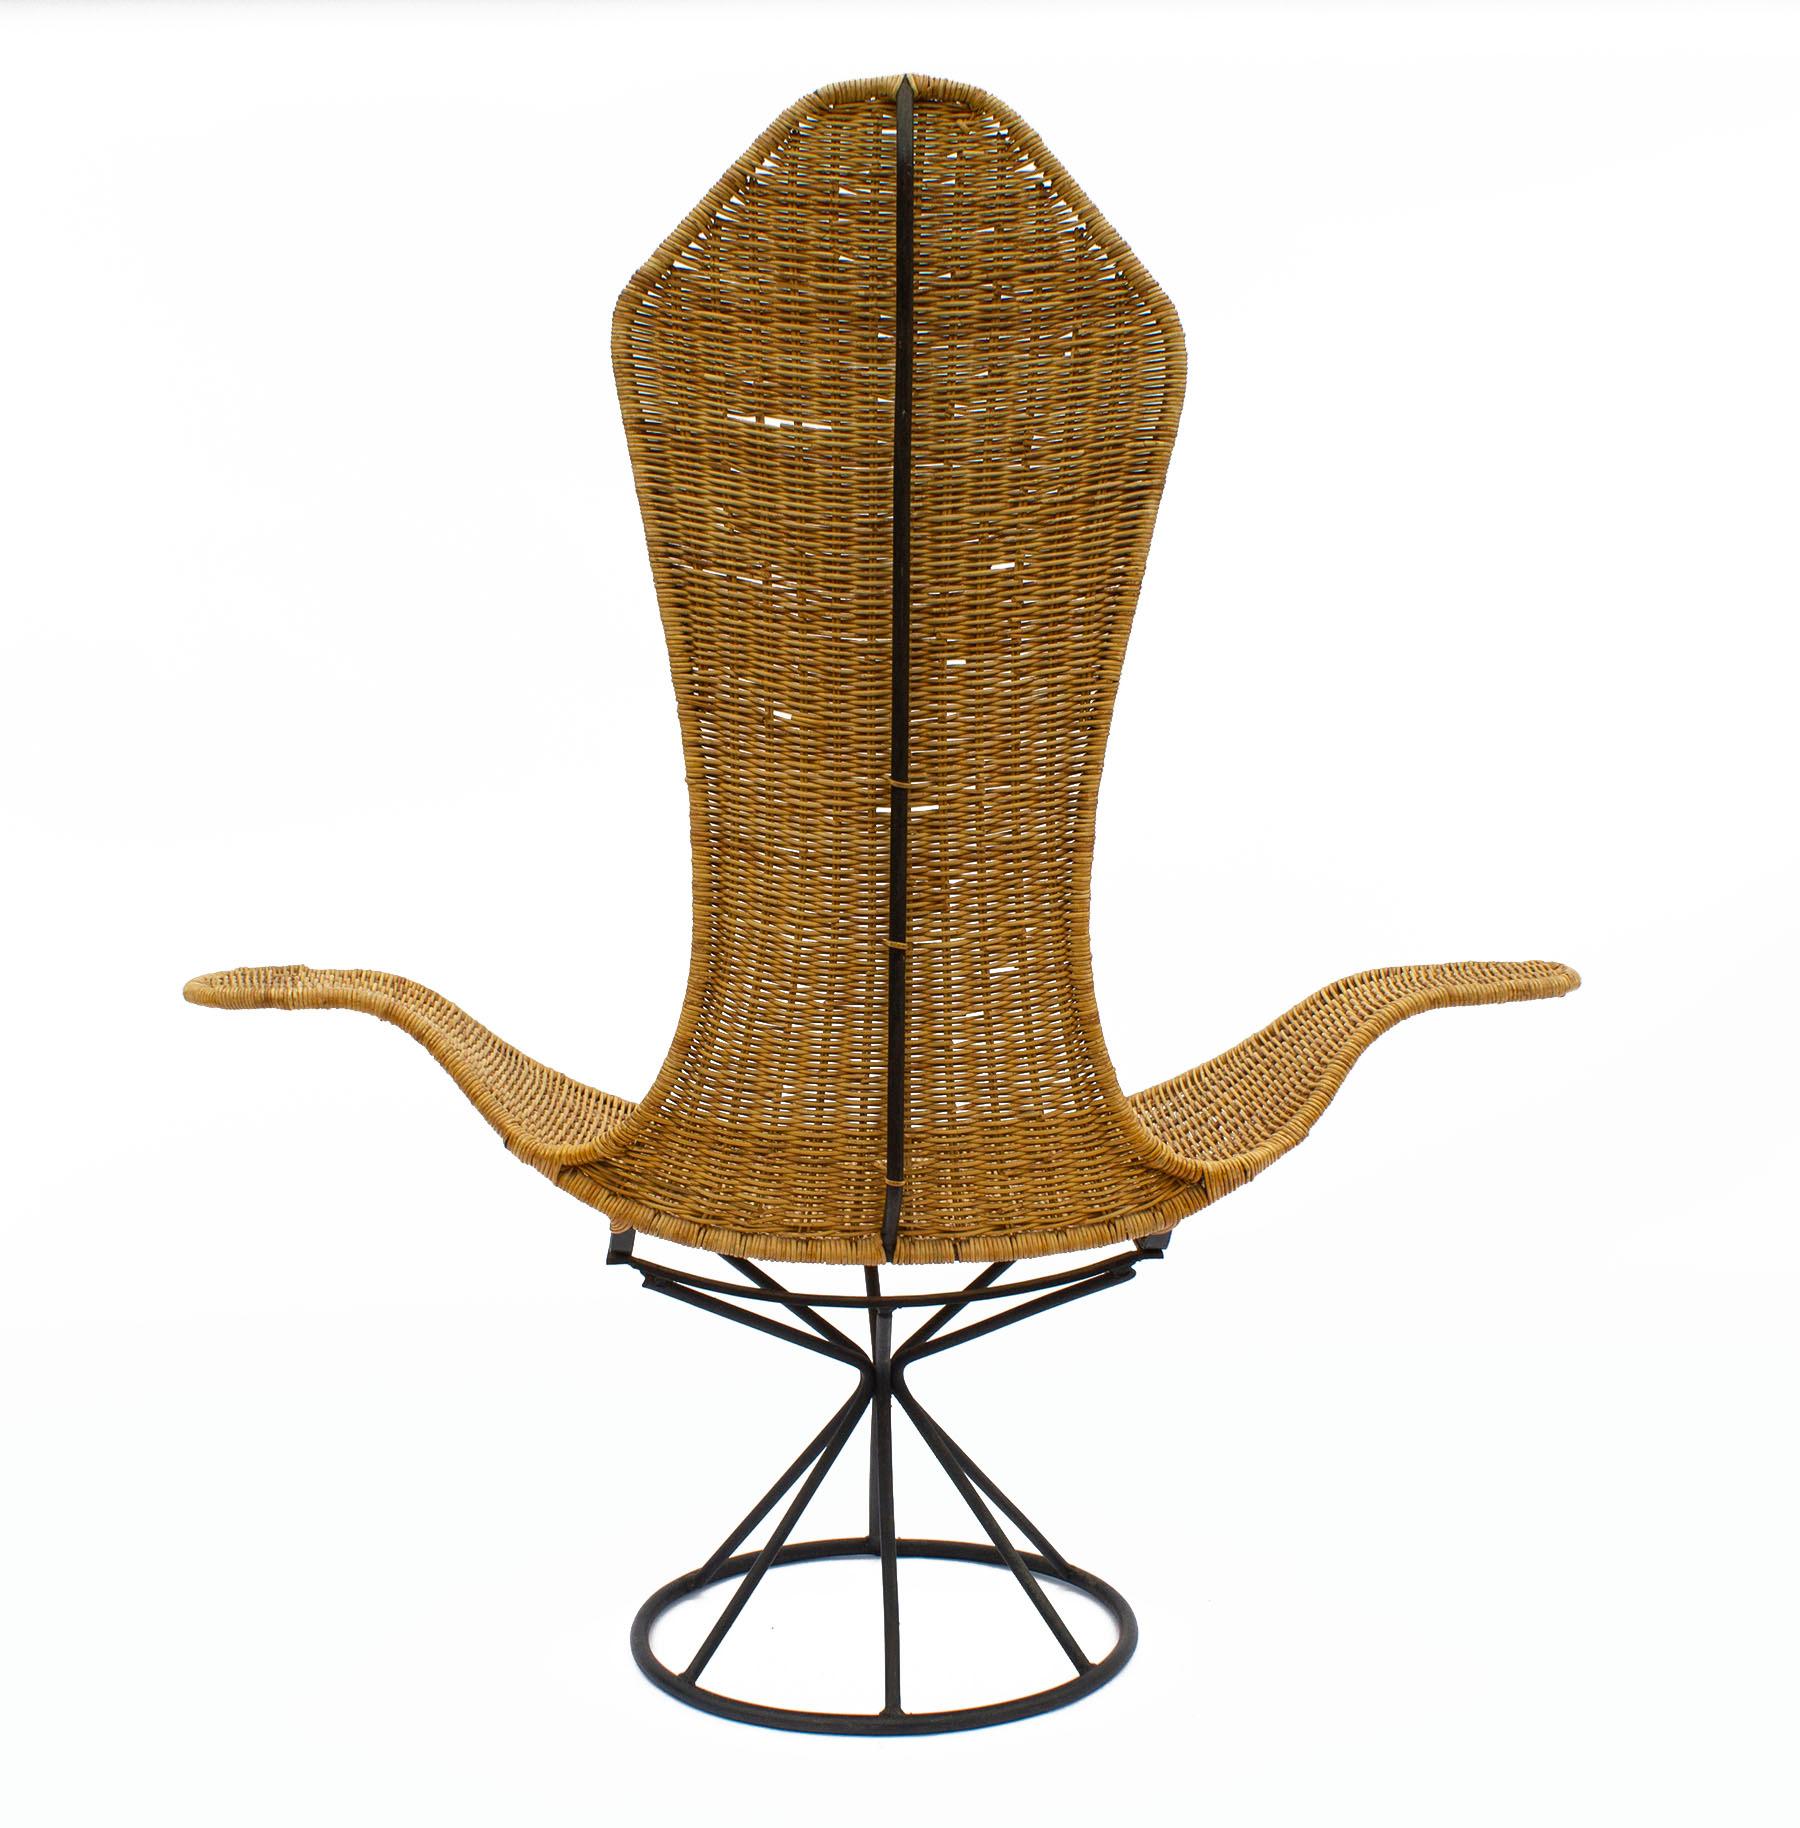 American Danny Ho Fong Wave Chair for Tropi-Cal Rattan and Steel, 1960s